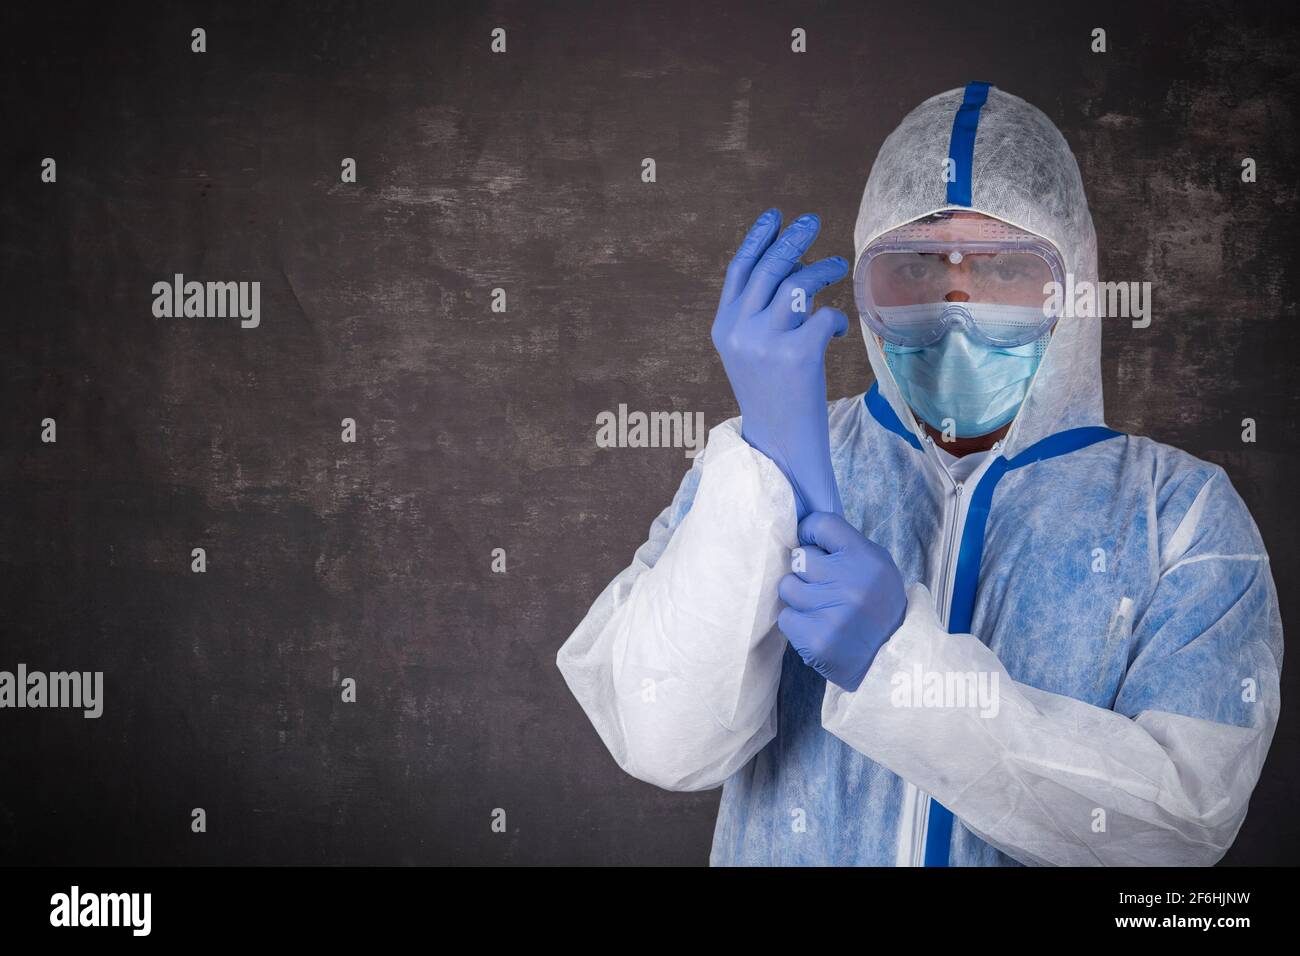 Man in protective suit, surgical mask and latex gloves with copy space for text Stock Photo